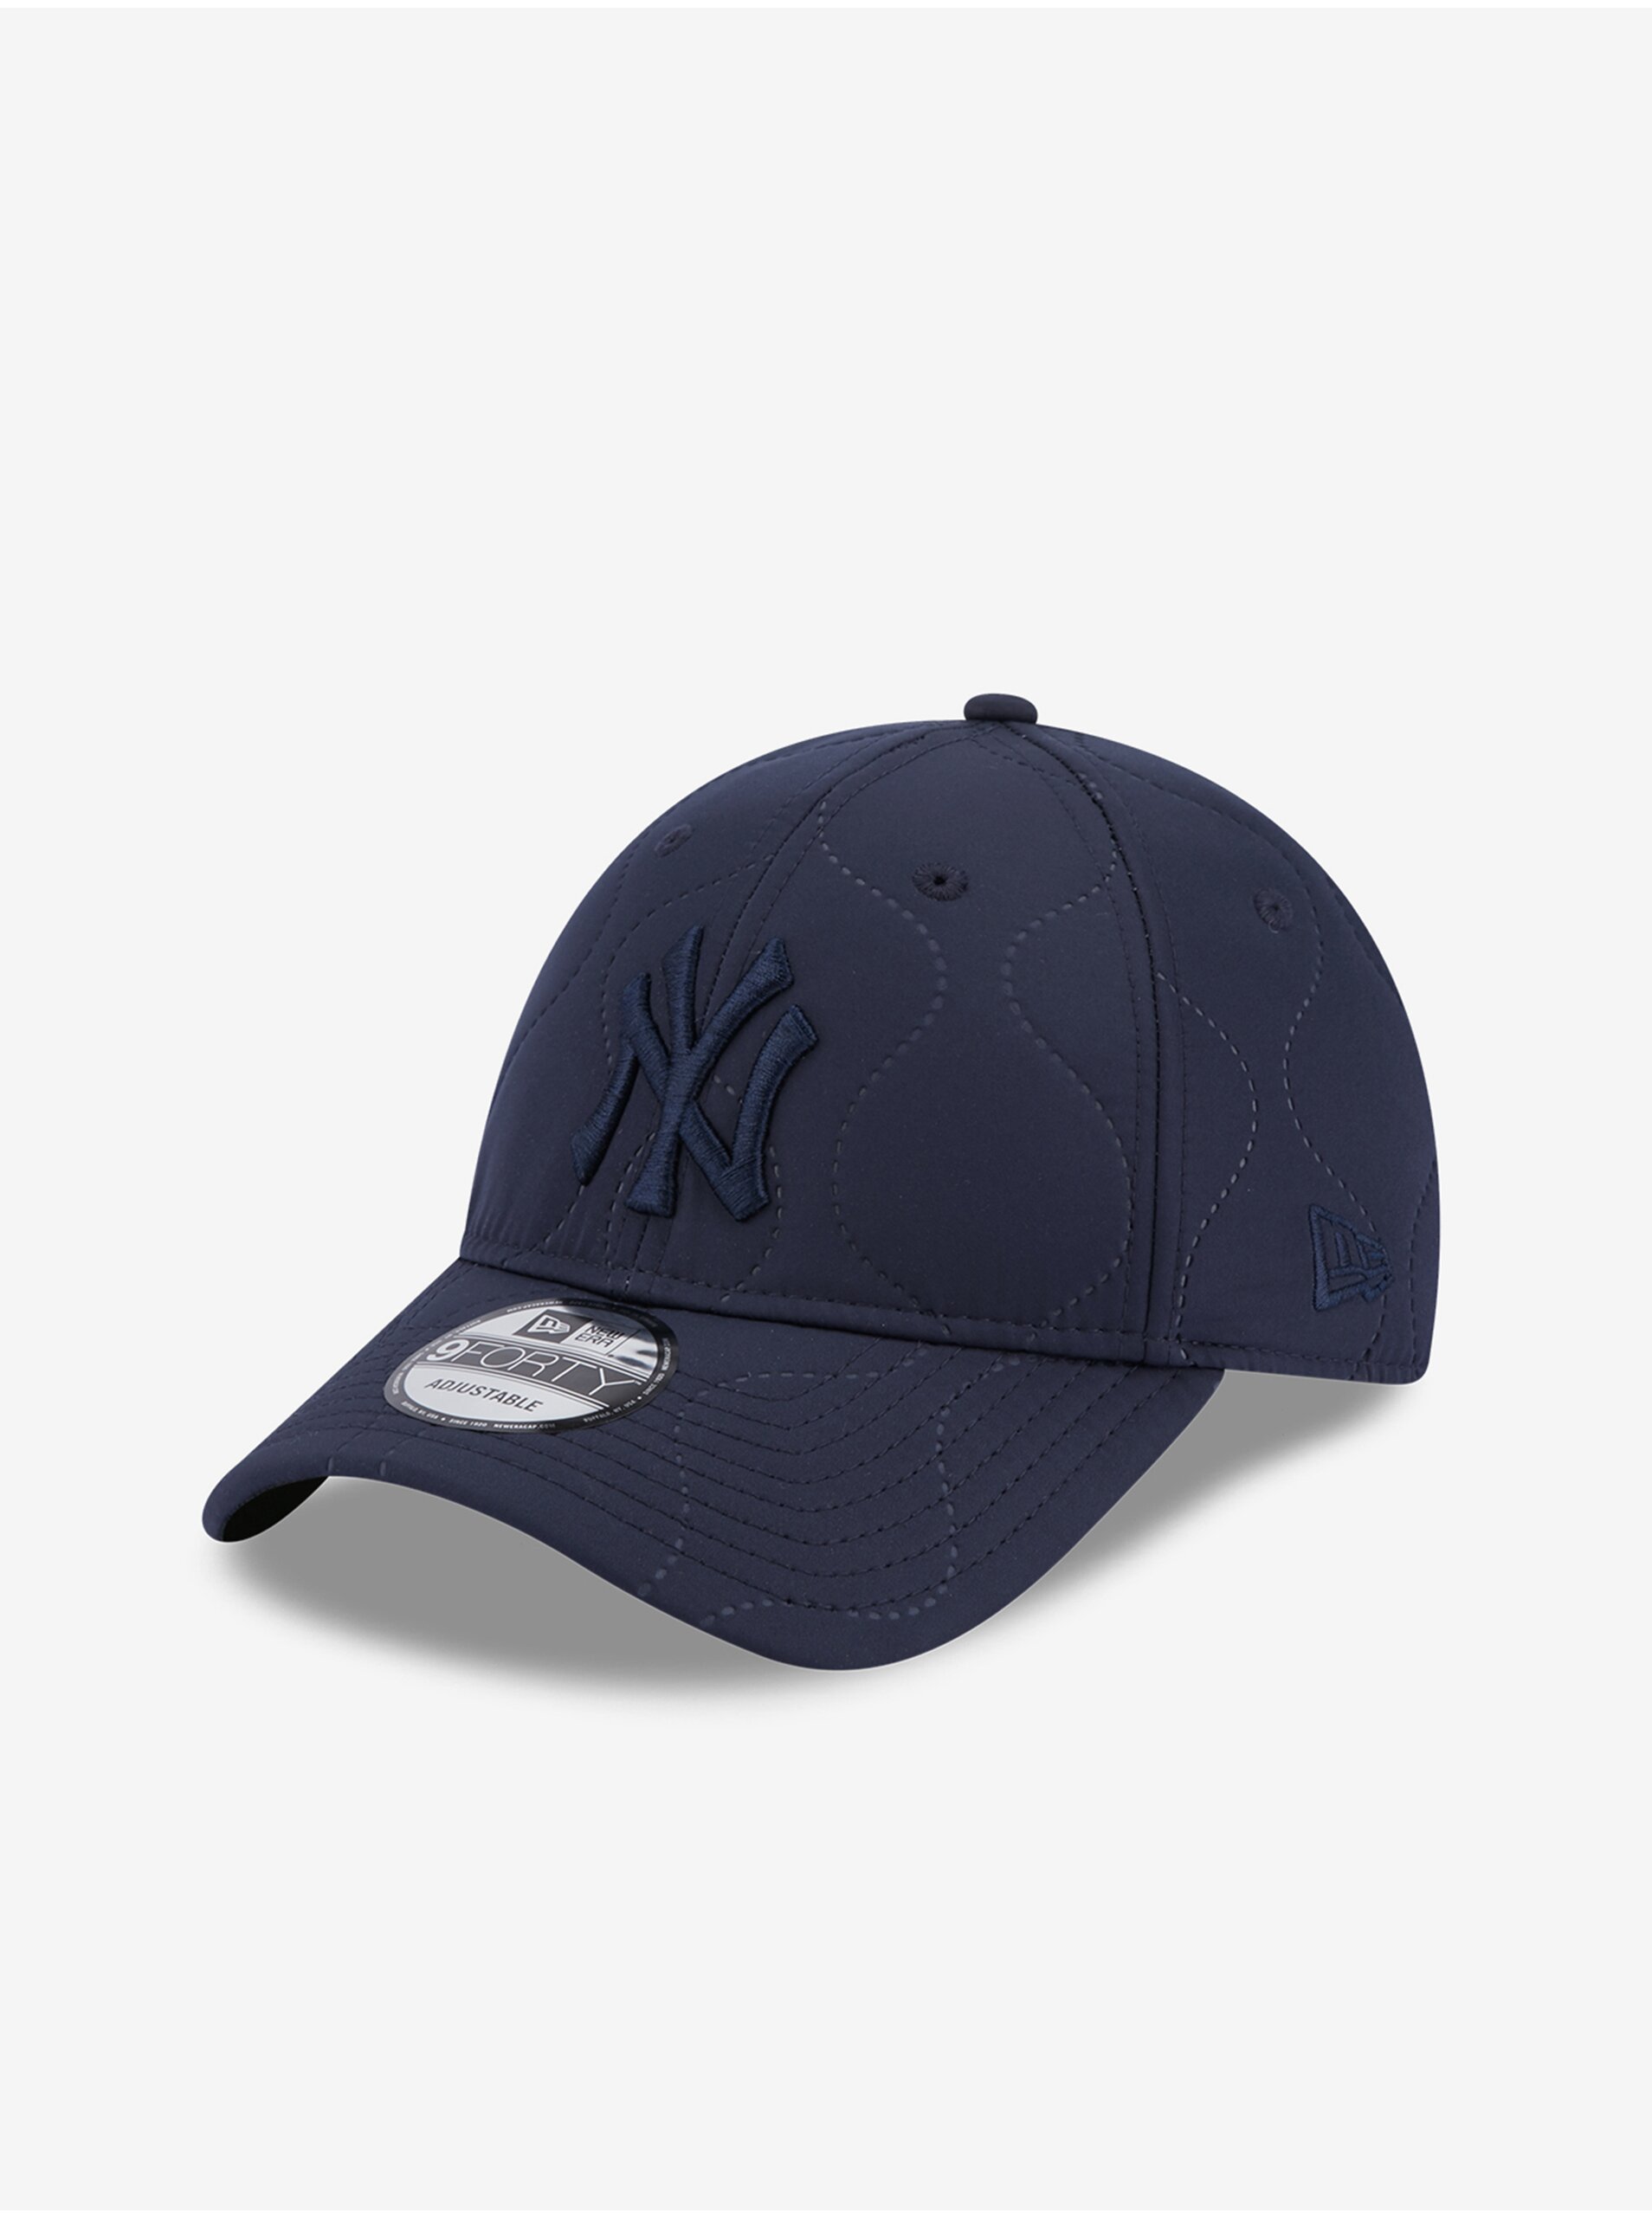 New Era 940 MLB Quilted 9forty NEYYAN Men's Blue Cap - Men's